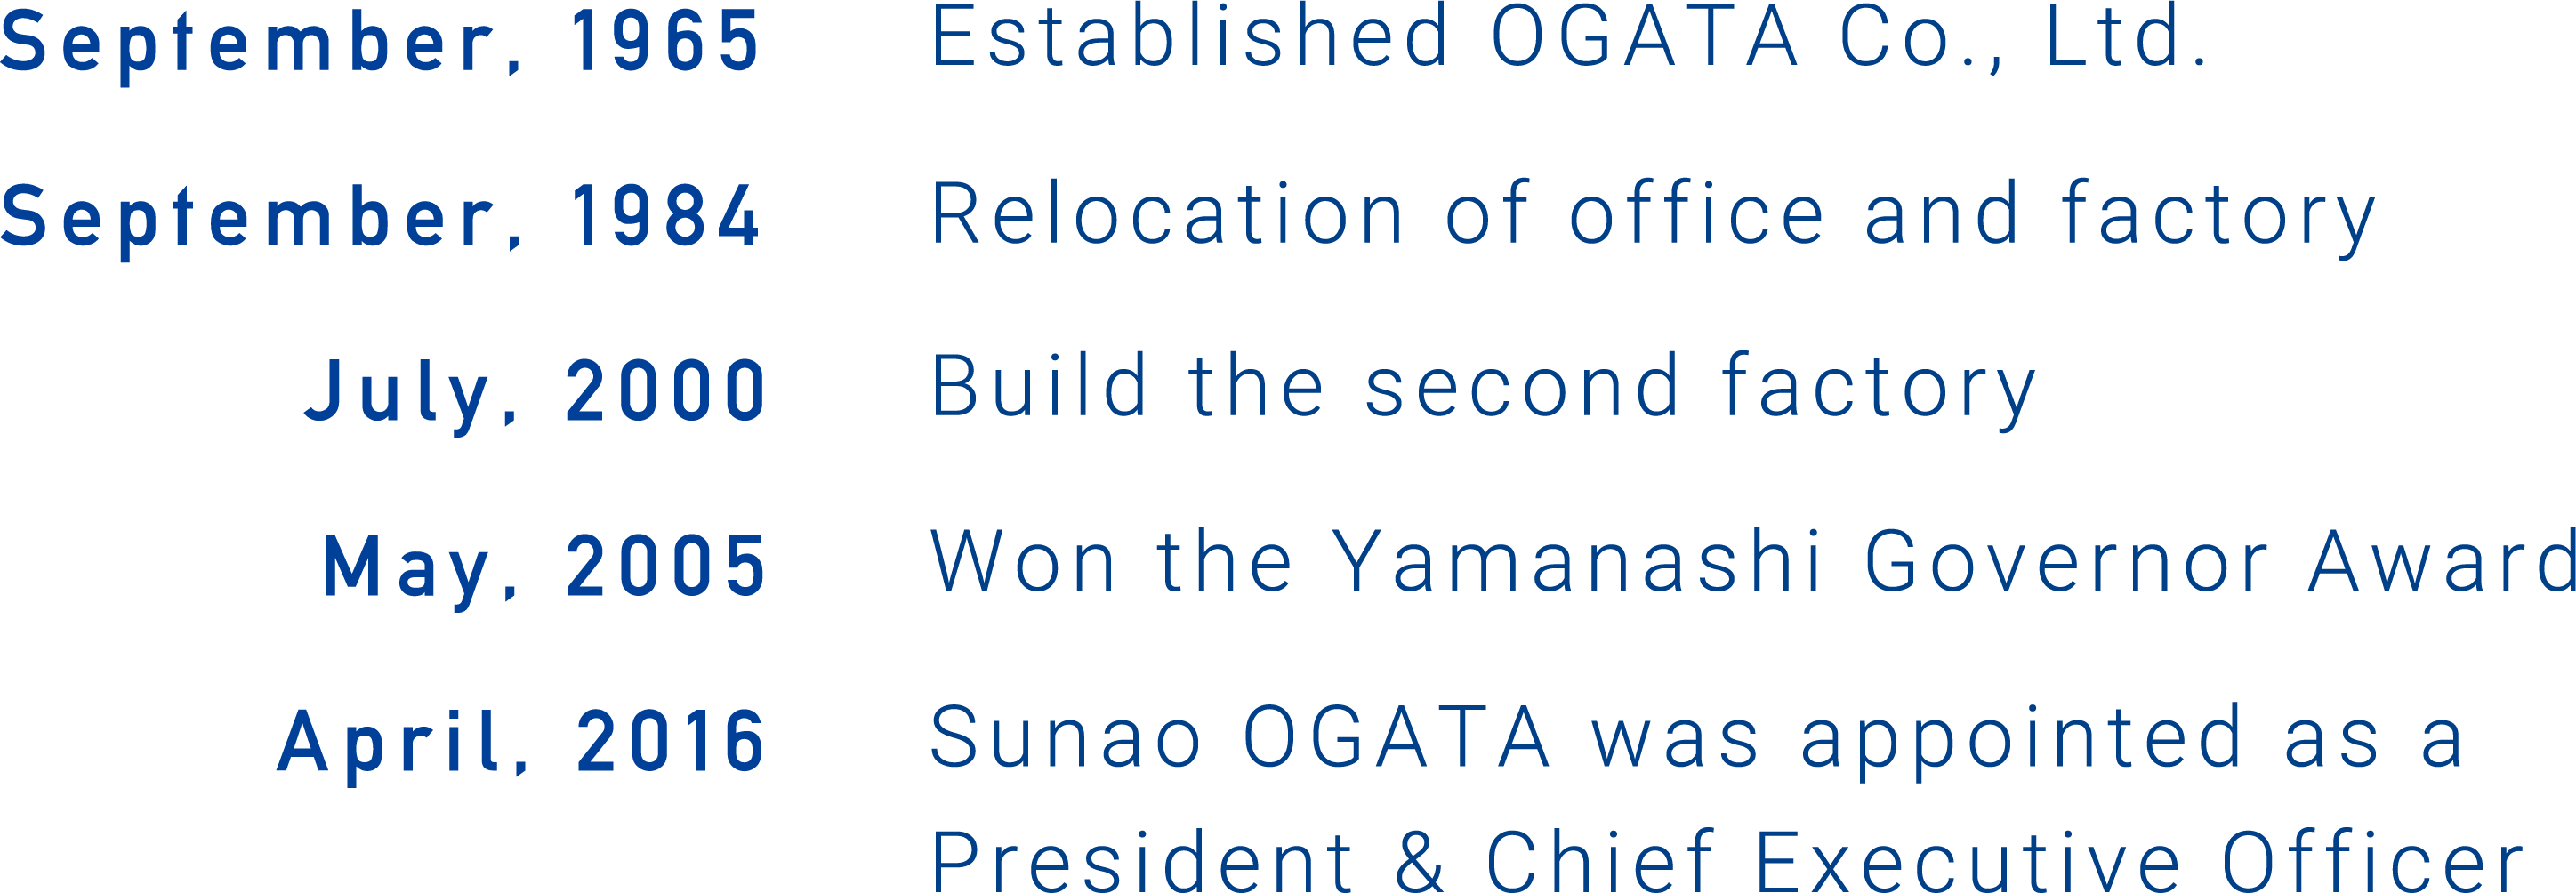 September, 1965 Established OGATA CORPORATION, September, 1984 Relocation of office and factory, July, 2005 Build the second factory, May, 2007 Won the Yamanashi Governor Award, April, 2016 Sunao OGATA was appointed as a President & Chief Executive Officer